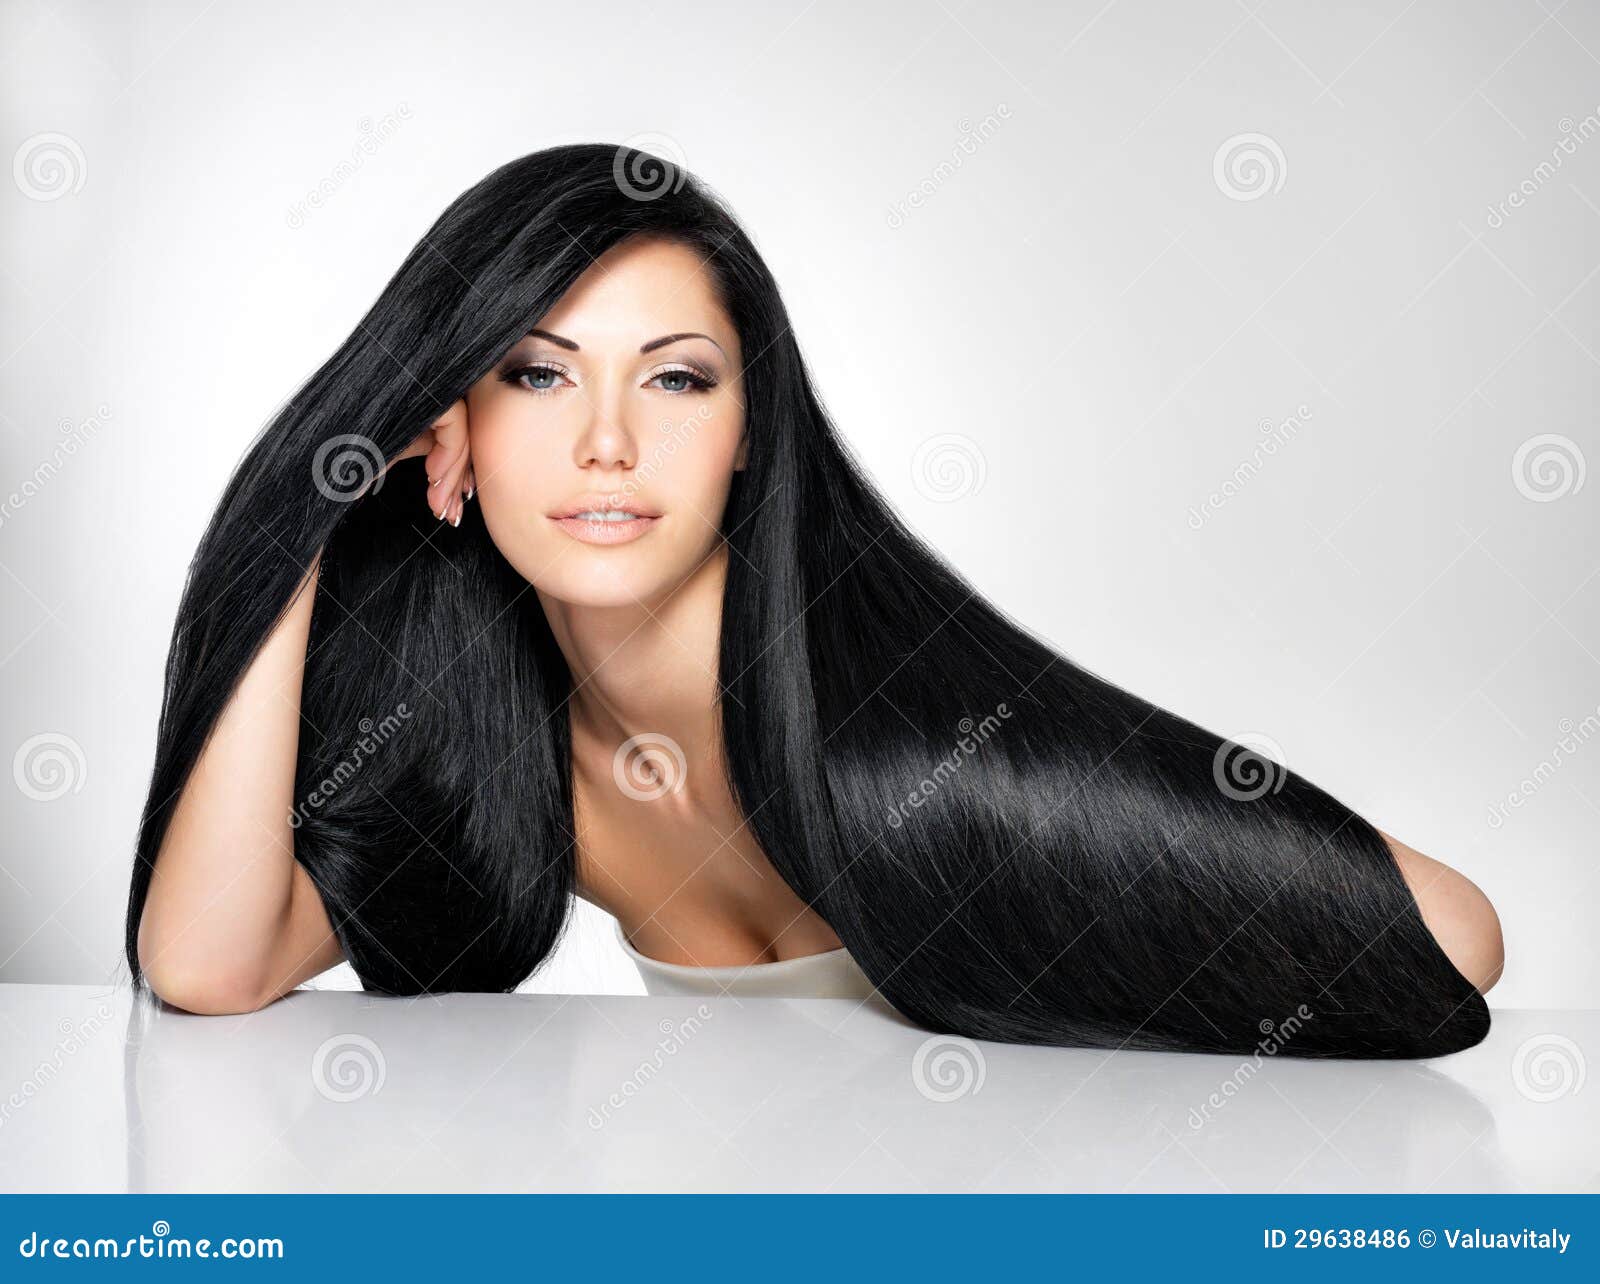 A Brunette with Long Hair Poses in the Studio Sitting on the Floor on a  Black BackgroundBlack and White Photo Stock Photo  Image of brunette  beautiful 210773988